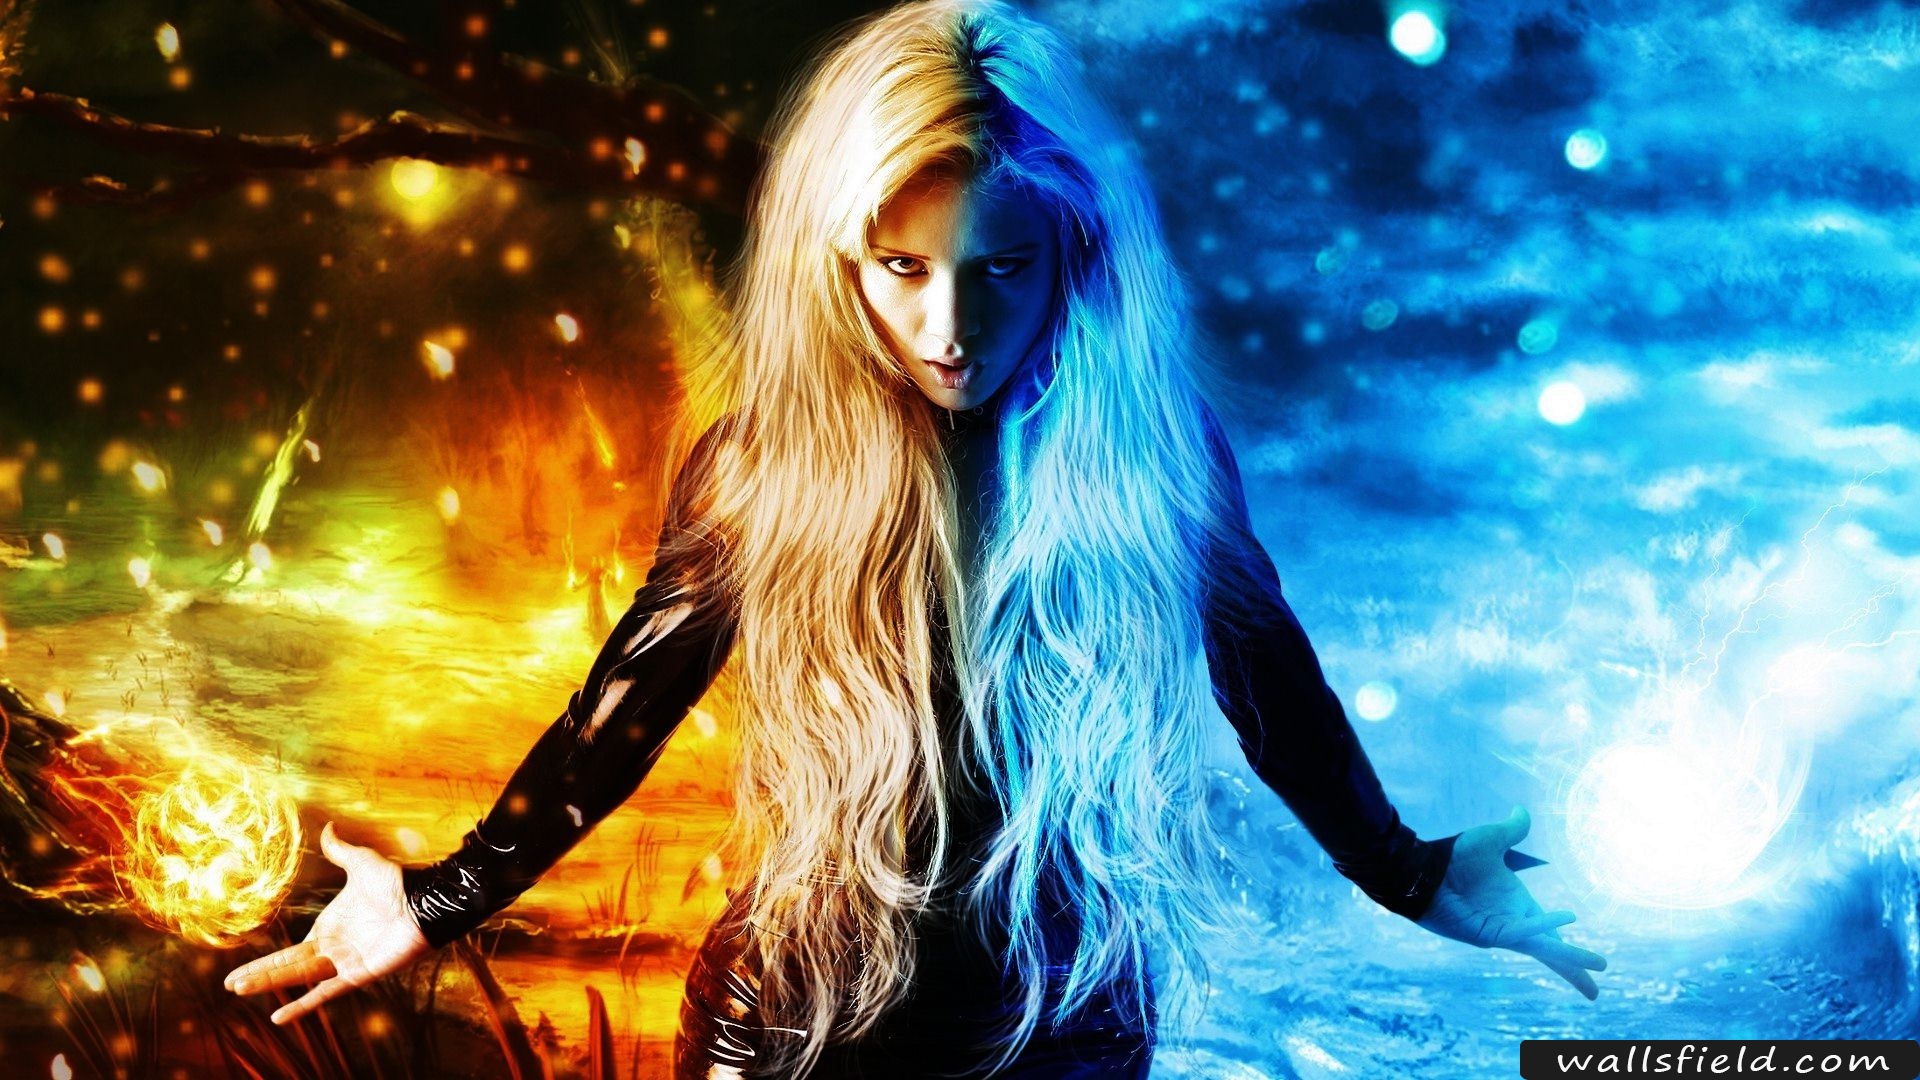 Ice And Fire Woman - HD Wallpaper 